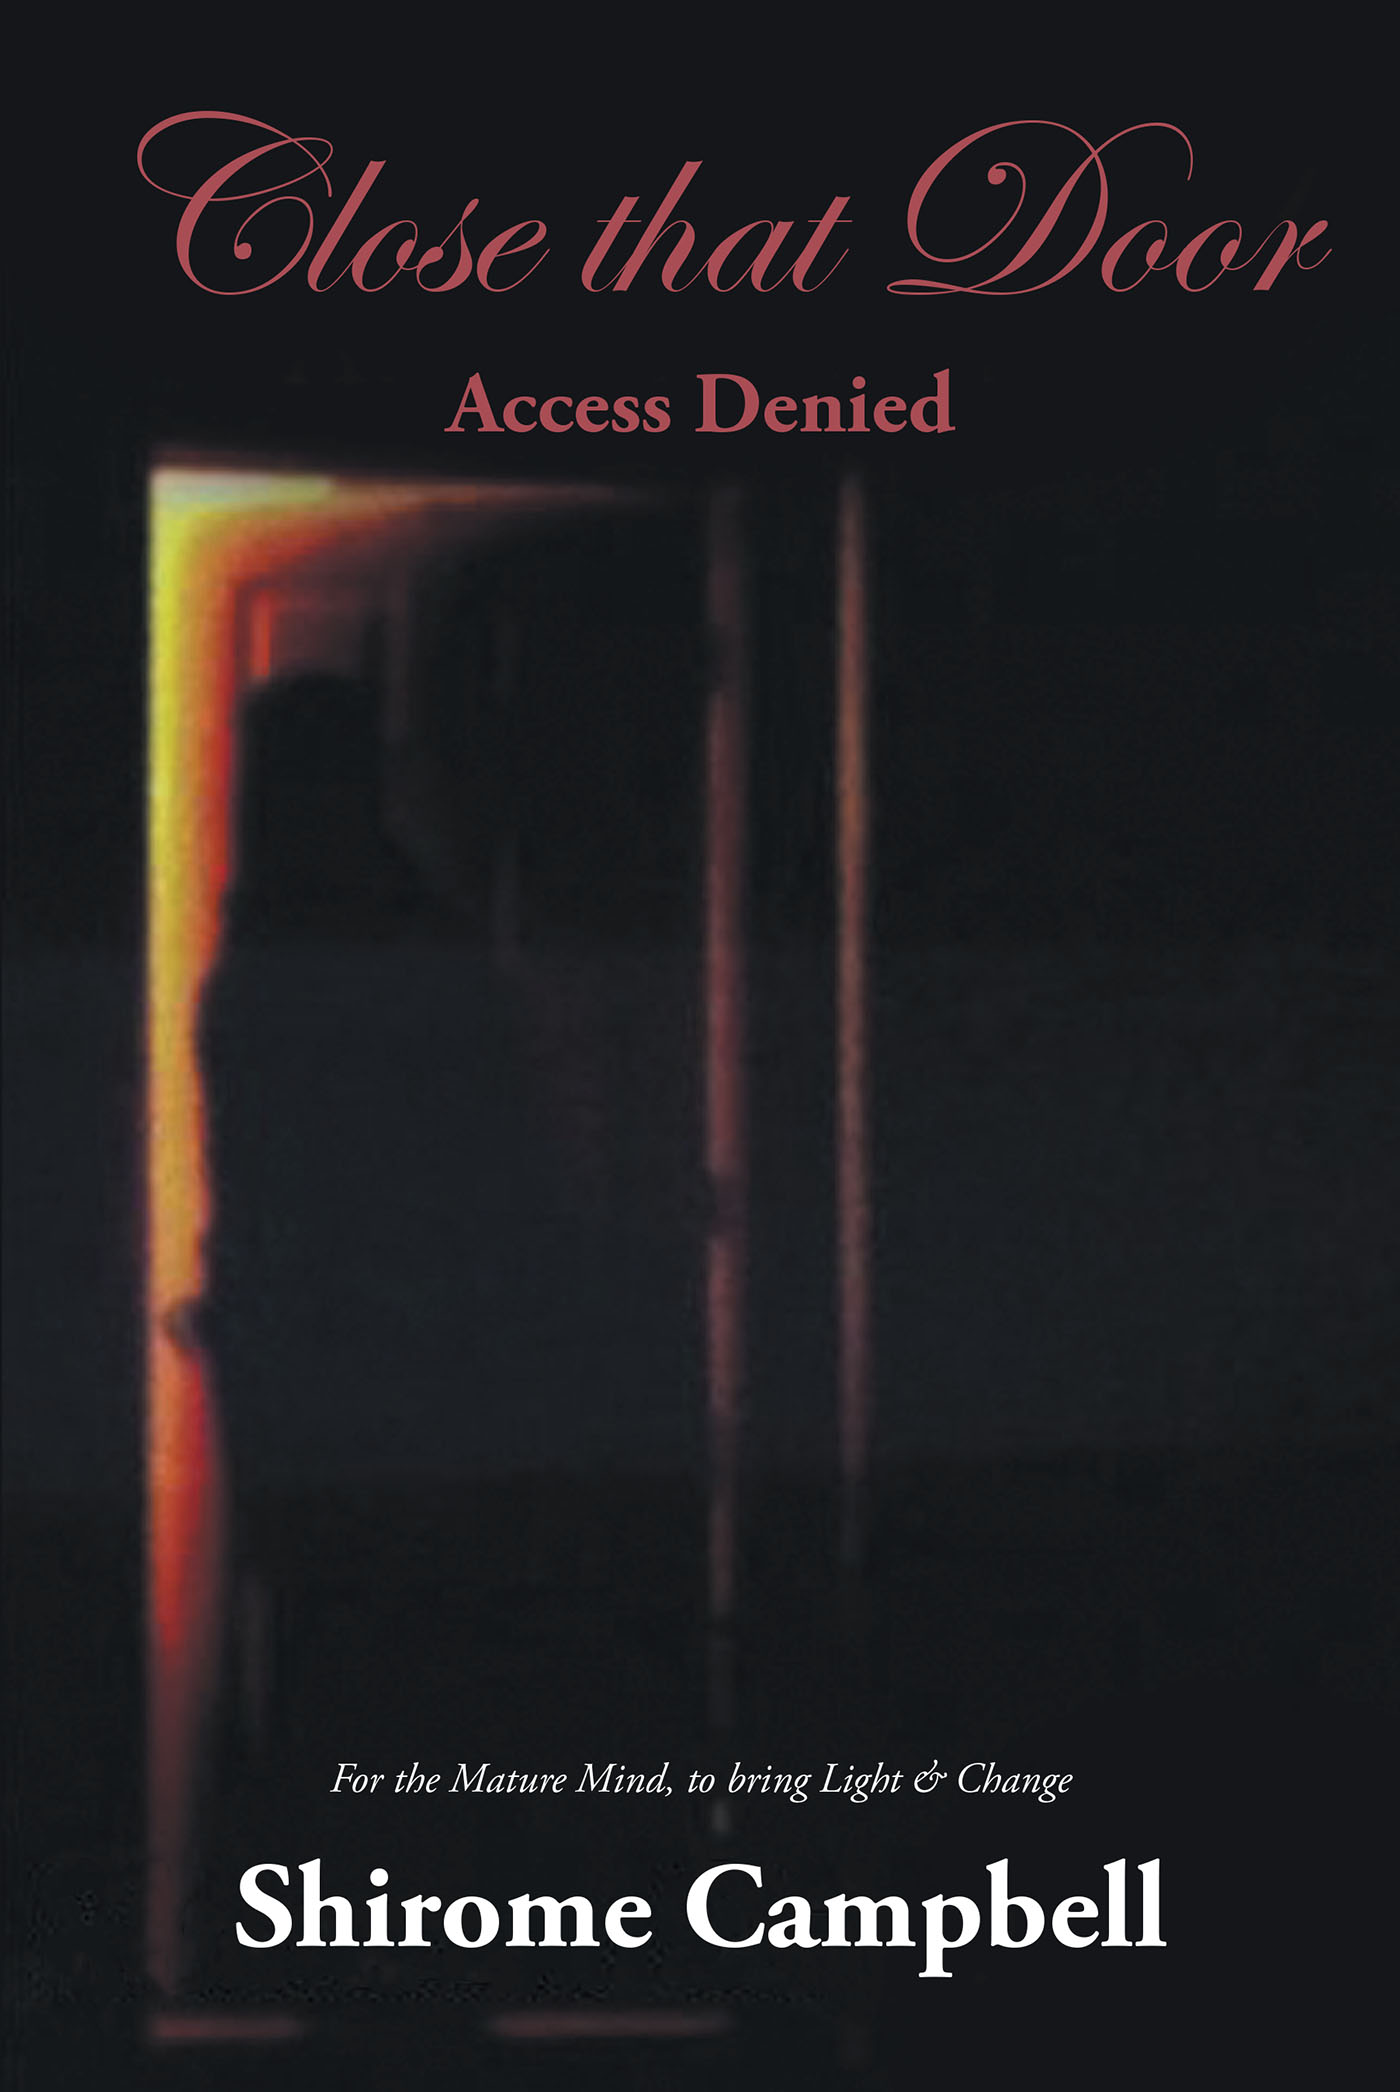 Shirome Campbell’s Newly Released "Close That Door: Access Denied" is a Compelling Discussion of the Influence of the Spirit of Perversion